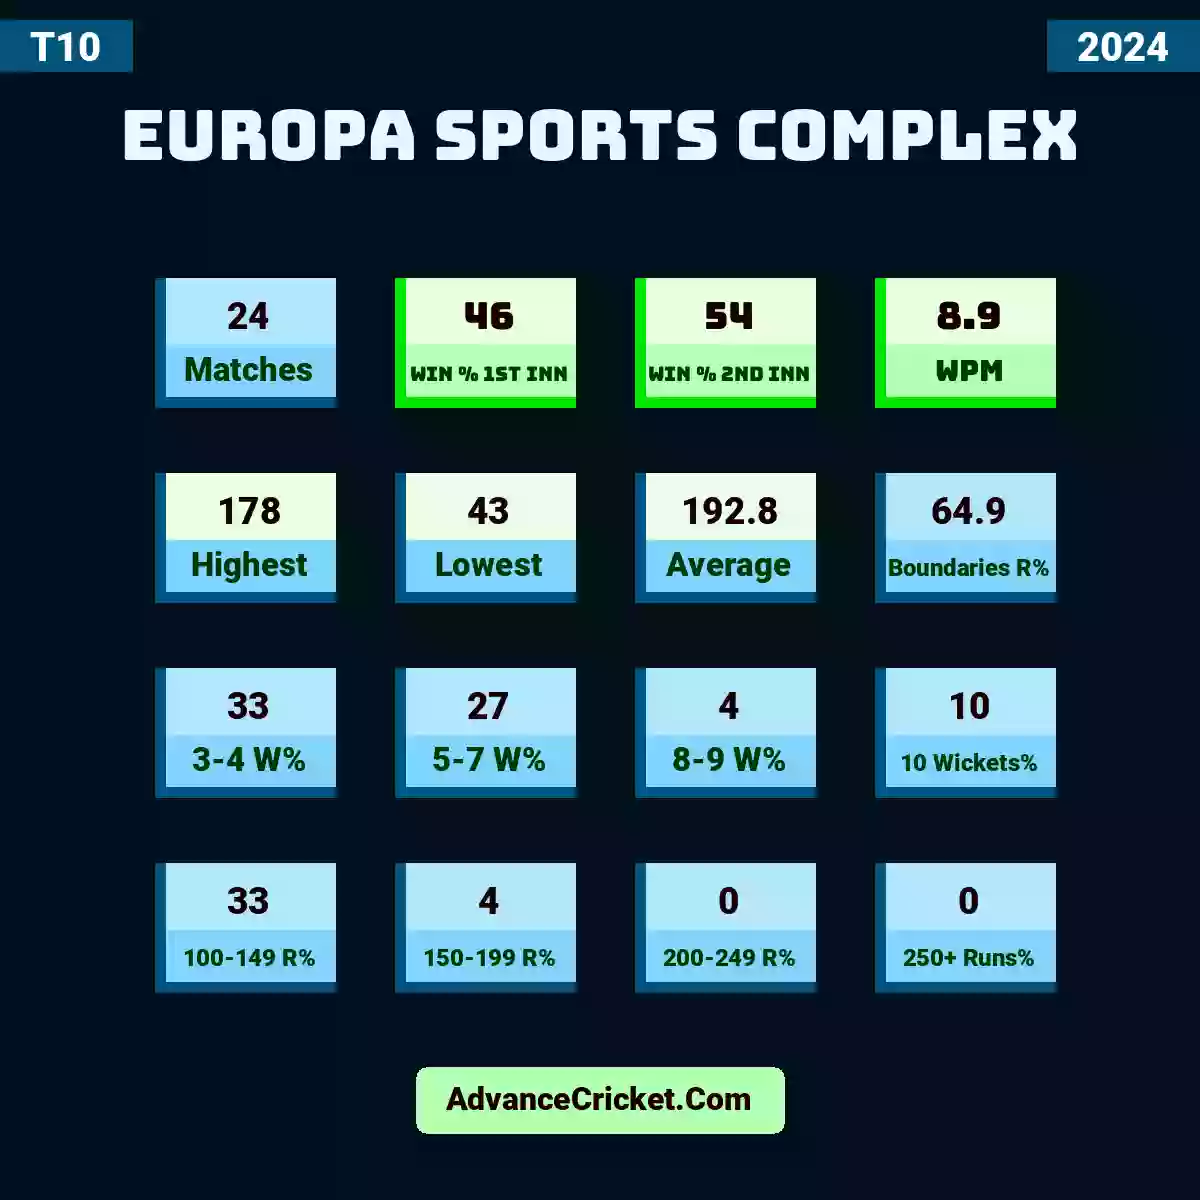 Image showing Europa Sports Complex with Matches: 24, Win % 1st Inn: 46, Win % 2nd Inn: 54, WPM: 8.9, Highest: 178, Lowest: 43, Average: 192.8, Boundaries R%: 64.9, 3-4 W%: 33, 5-7 W%: 27, 8-9 W%: 4, 10 Wickets%: 10, 100-149 R%: 33, 150-199 R%: 4, 200-249 R%: 0, 250+ Runs%: 0.